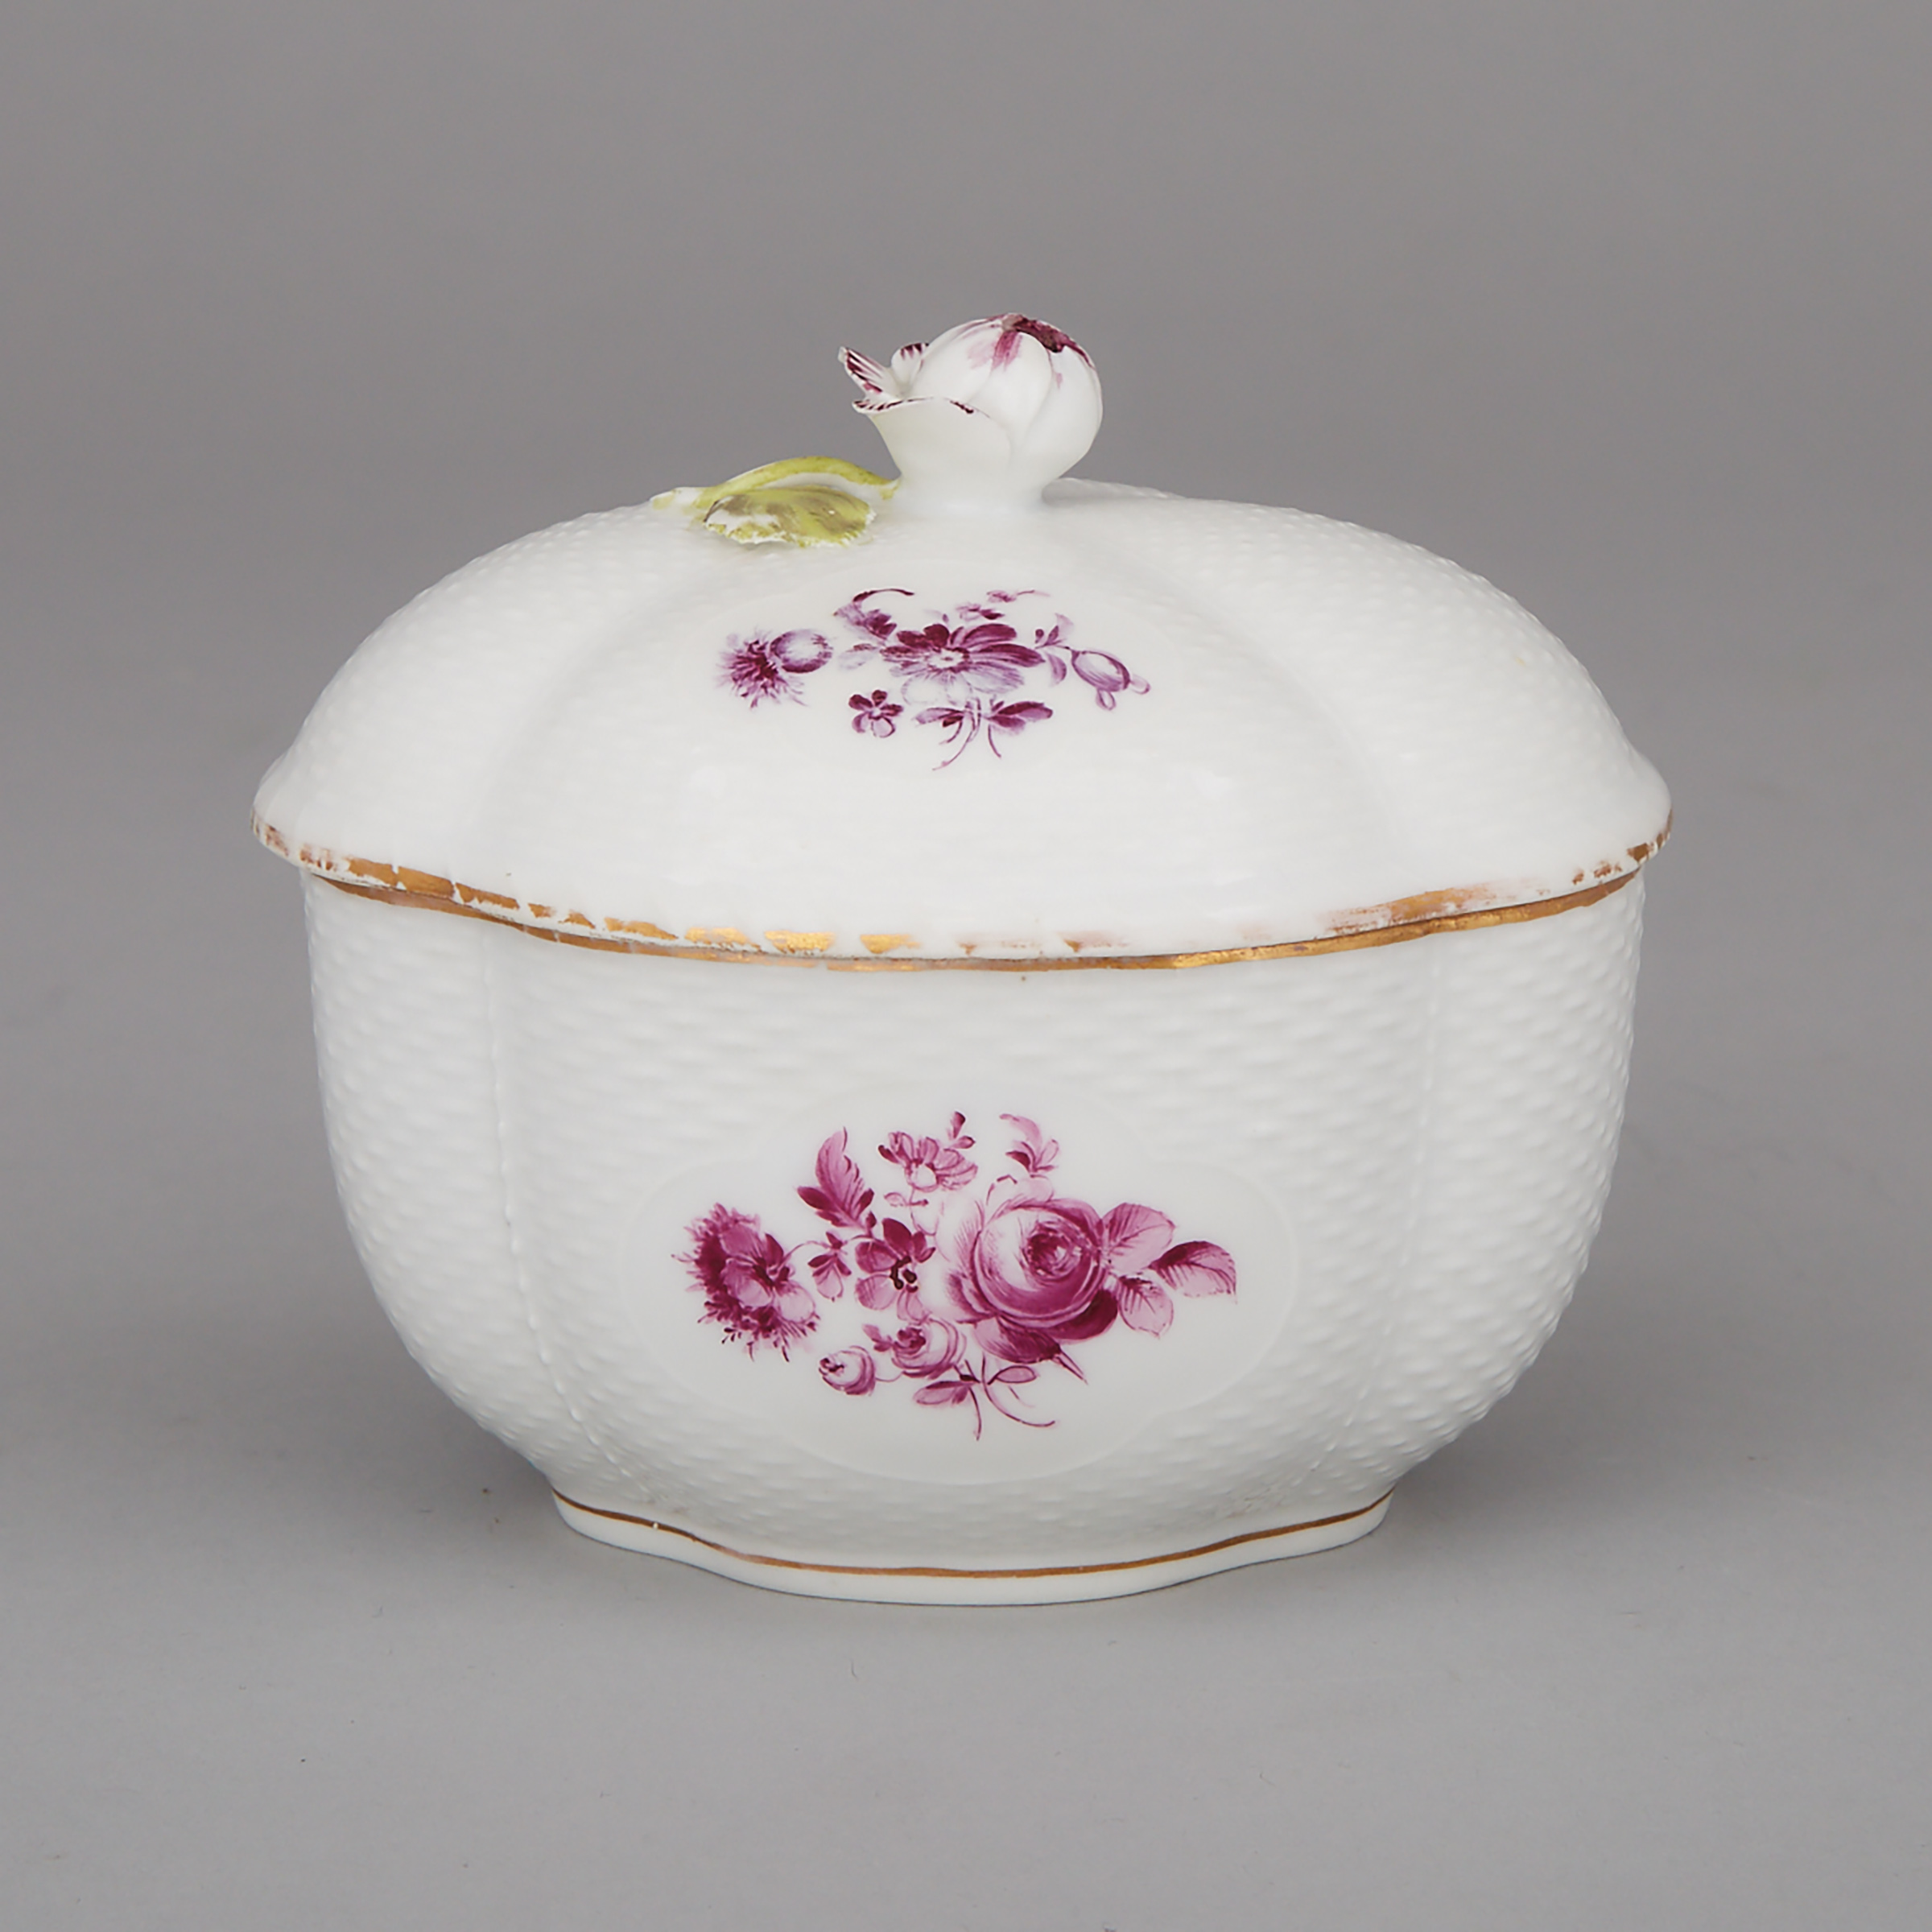 German Porcelain Covered Sugar Bowl, late 18th century